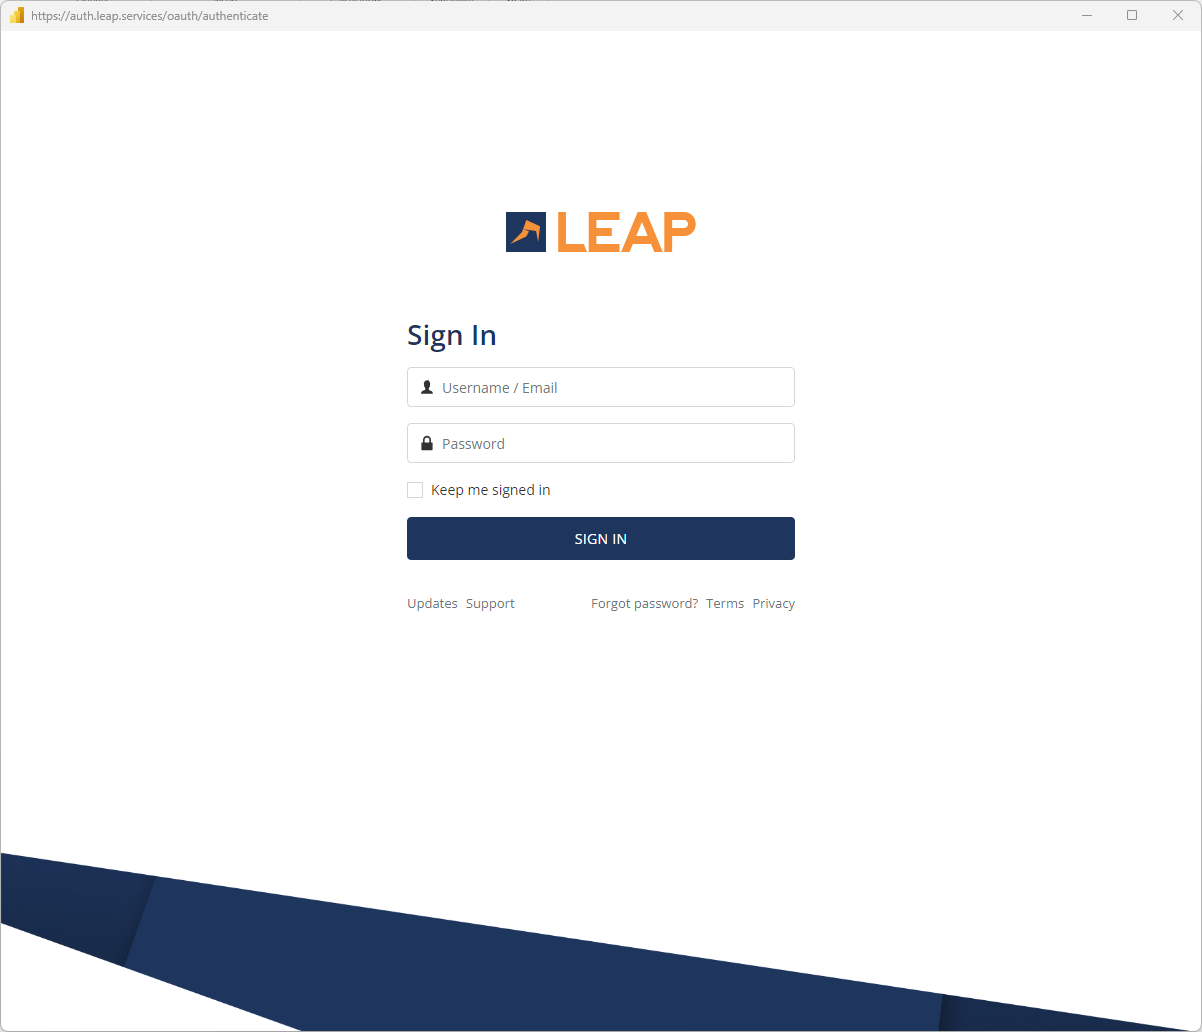 Screenshot of the sign in screen for LEAP.